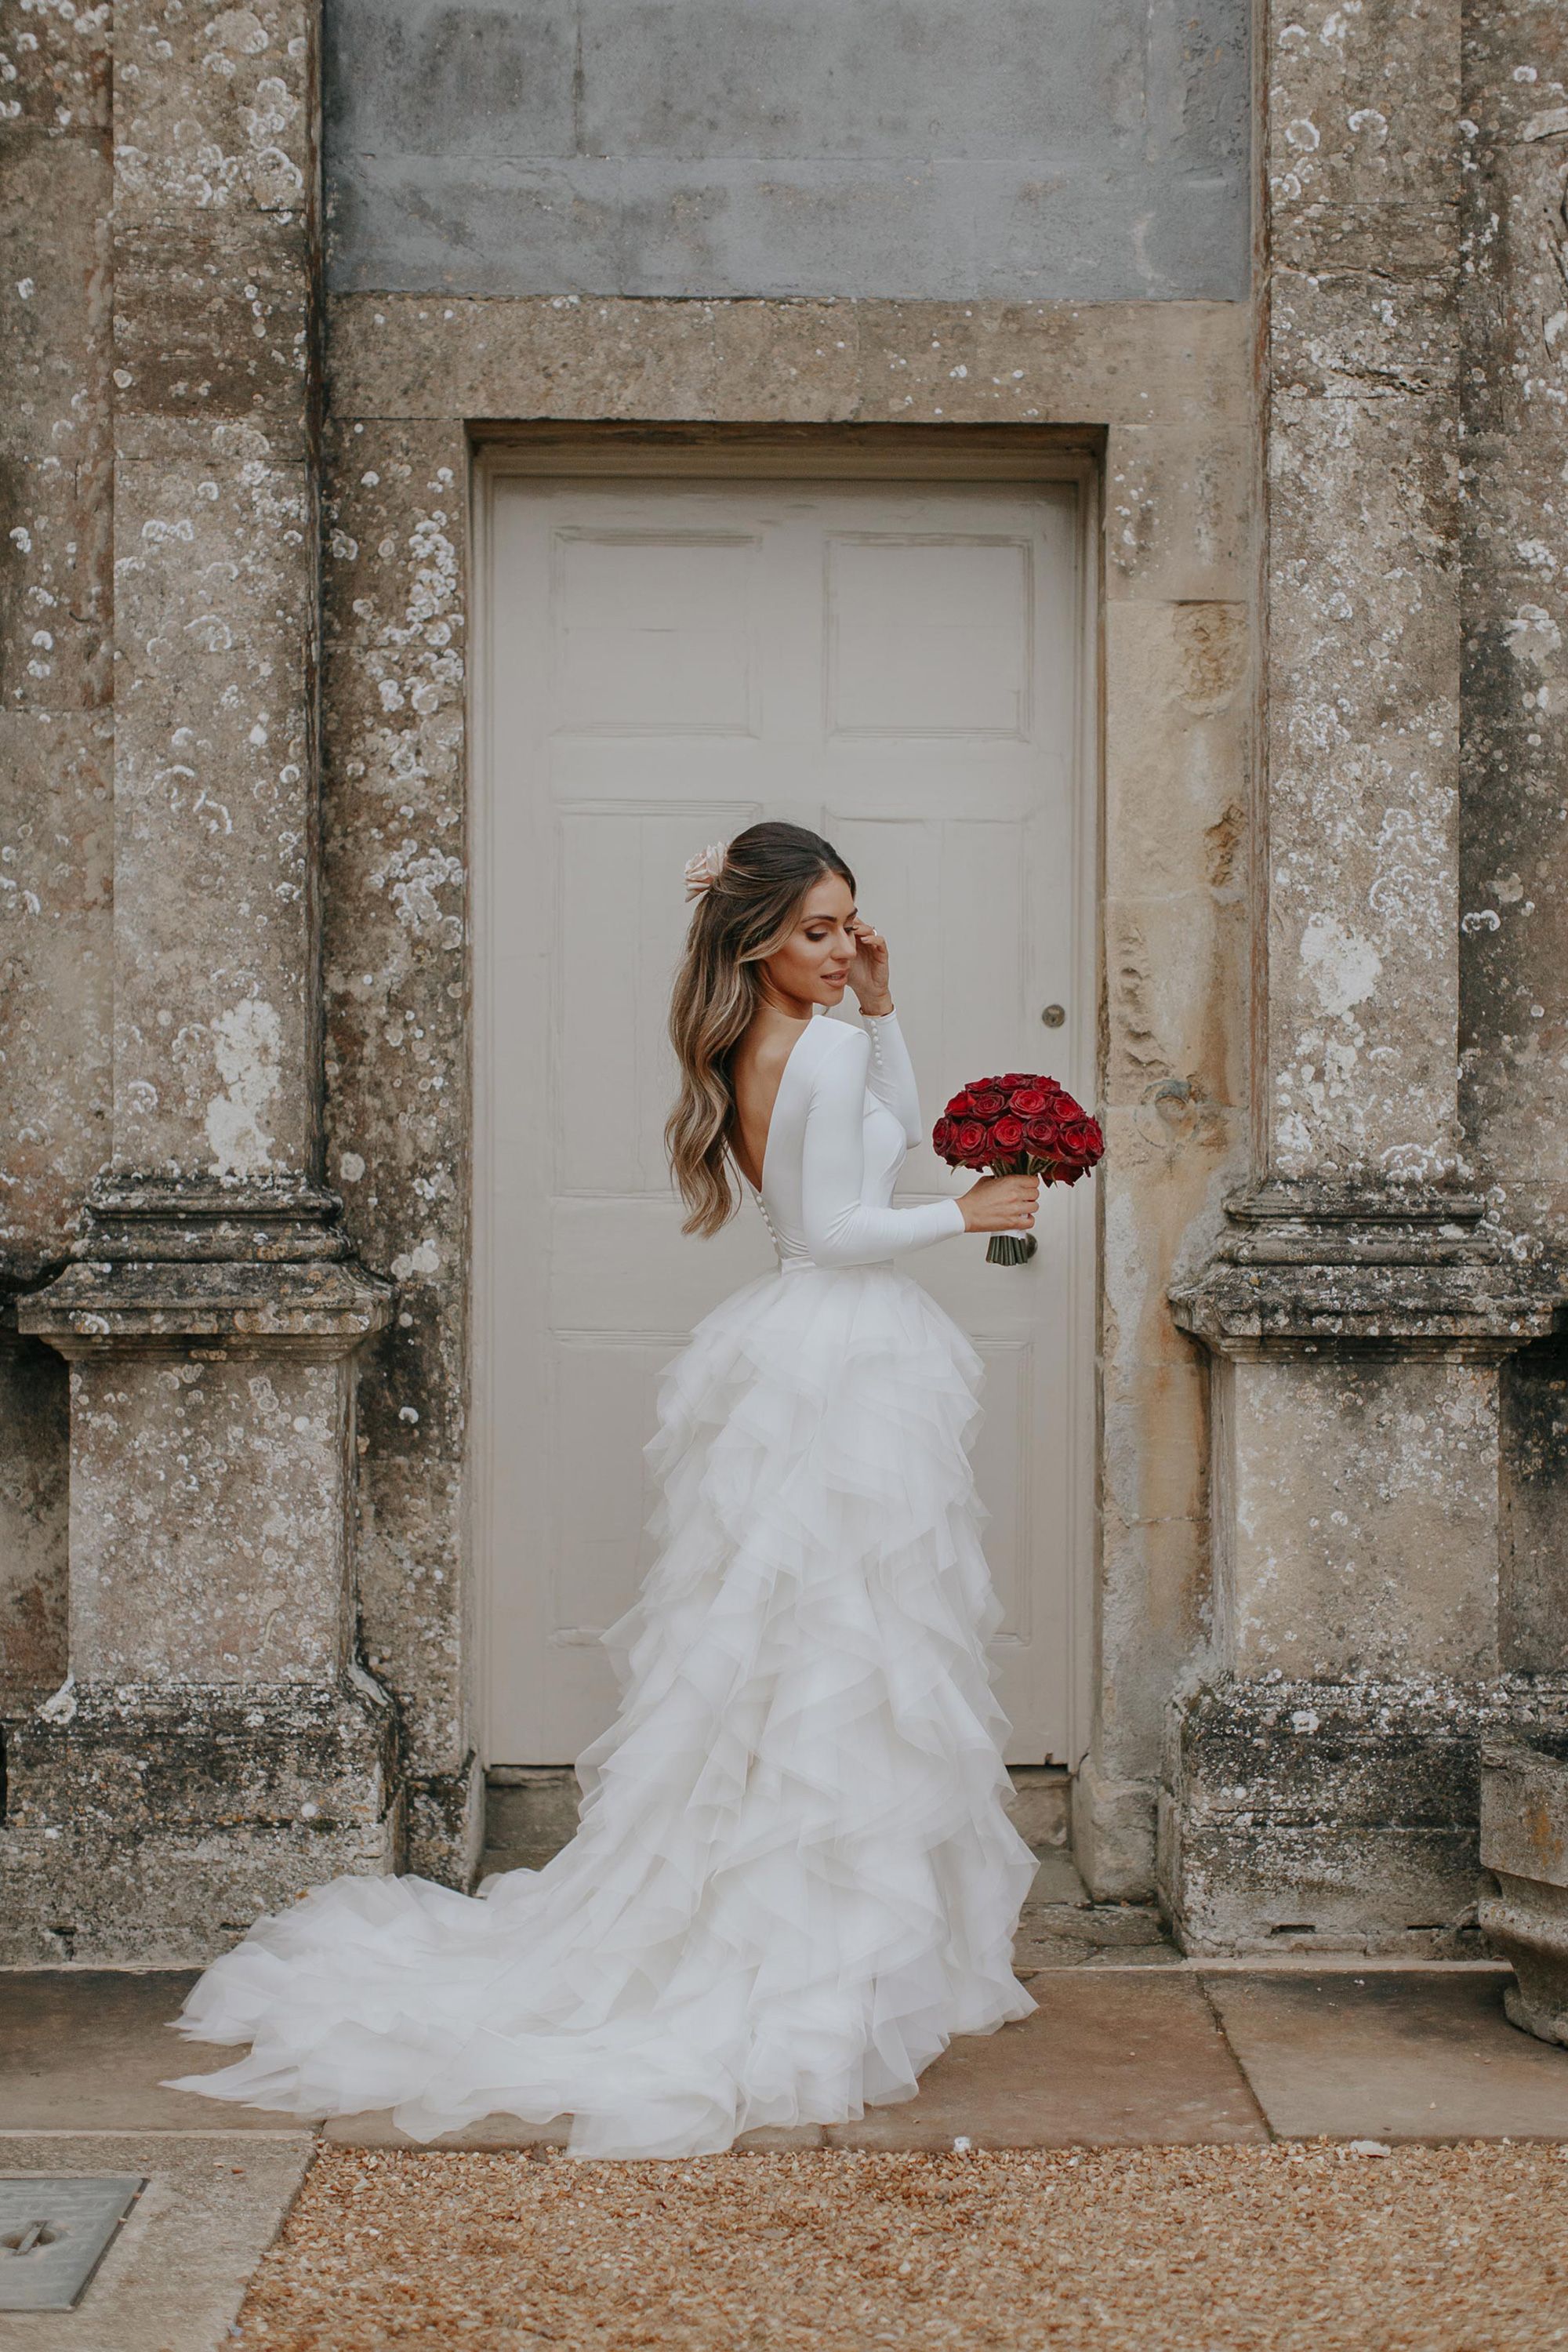 Wedding inspiration: Lydia Millen shares her bridal diary